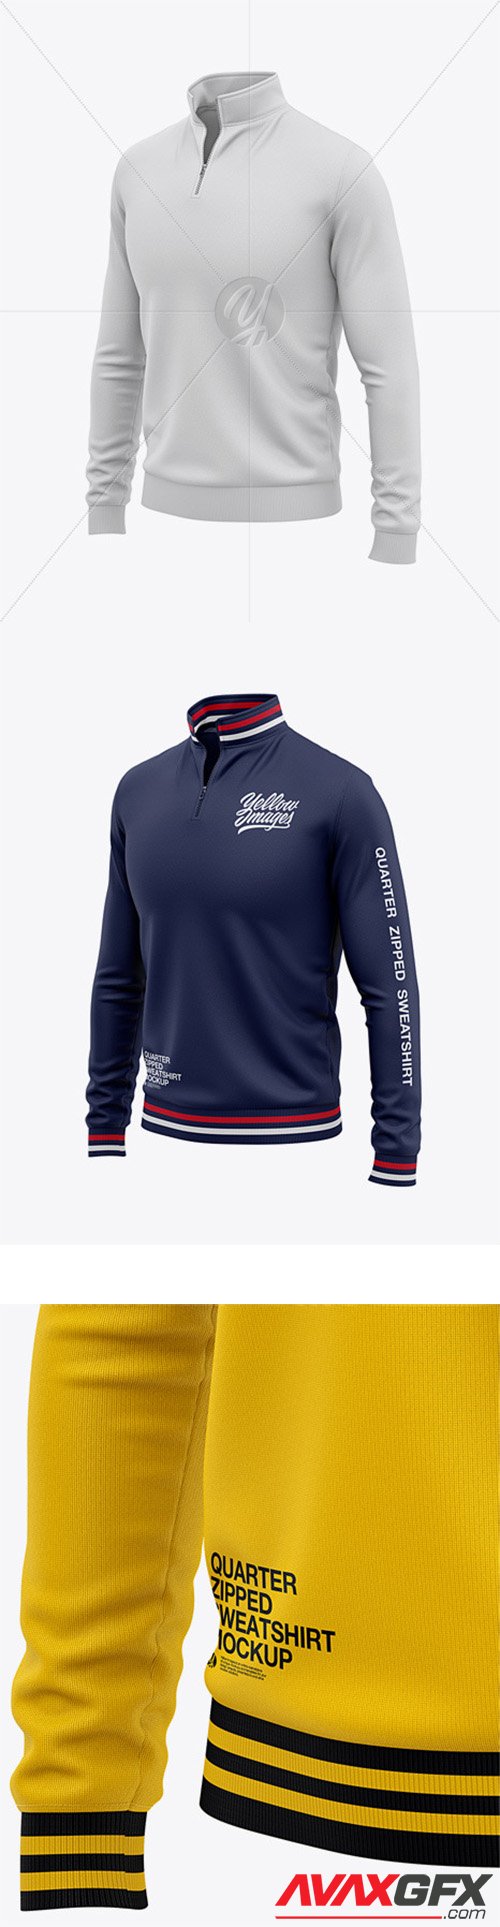 Download Men S Quarter Zip Sweatshirt Mockup Front Half Side View Of Zipped Pullover 53166 Avaxgfx All Downloads That You Need In One Place Graphic From Nitroflare Rapidgator